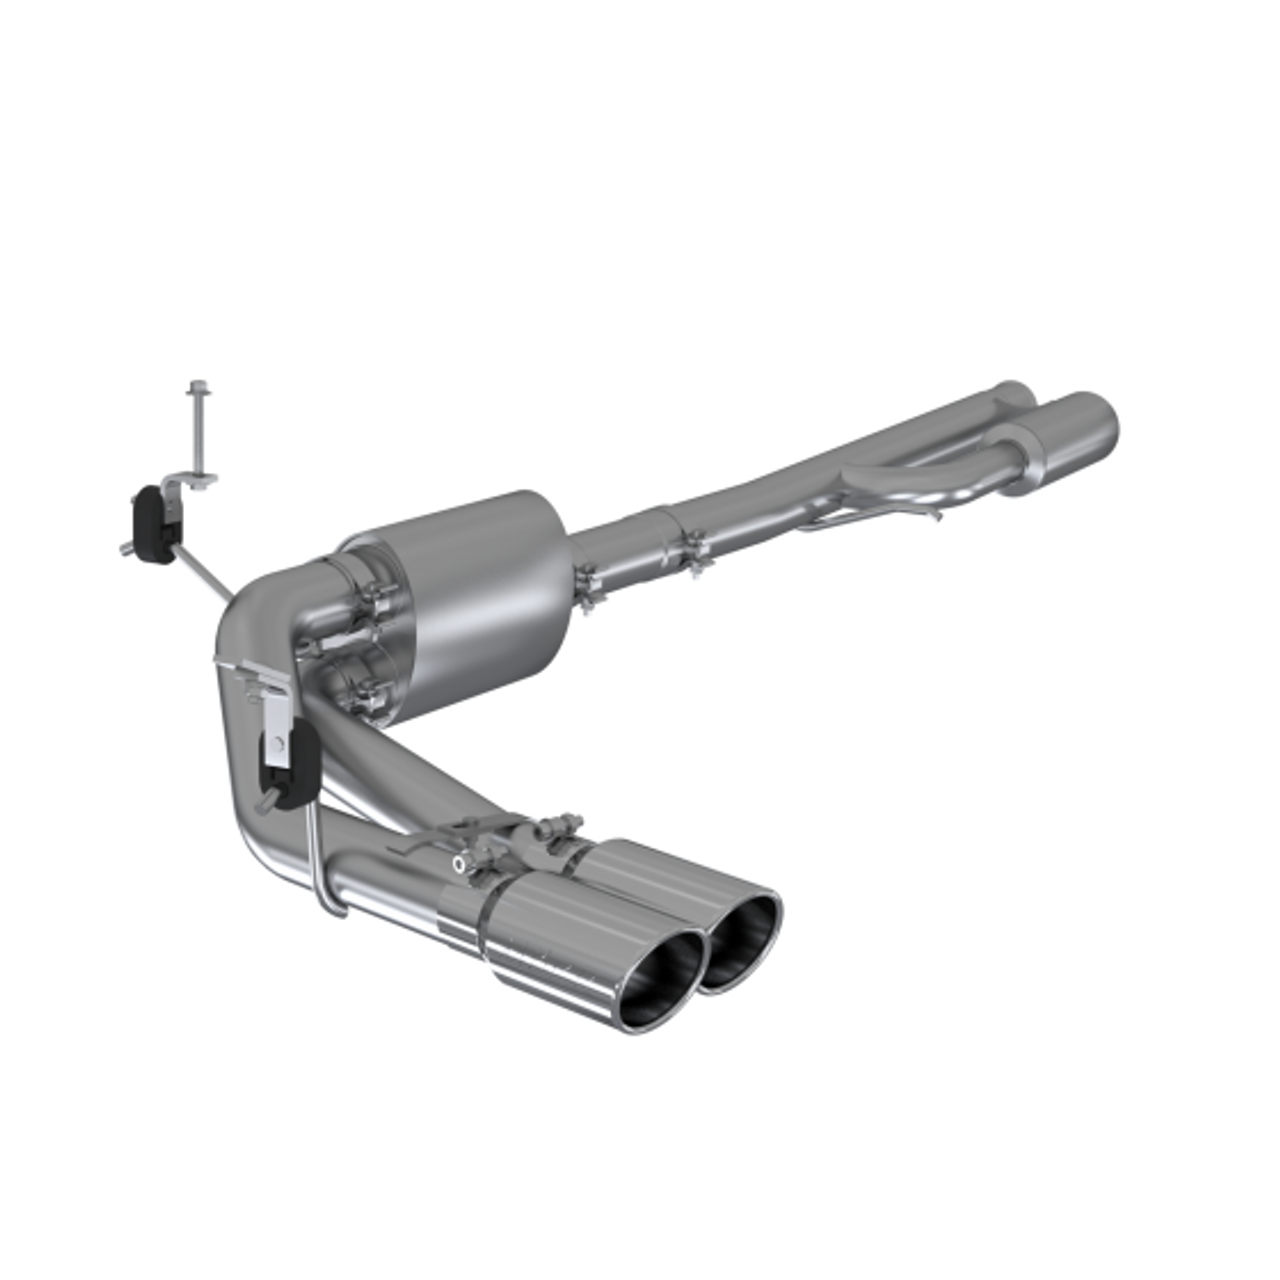 MBRP 3" PRE AXLE STAINLESS EXHAUST FOR 19-21 SILVERADO GMC SIERRA 1500 5.3L 4.3L